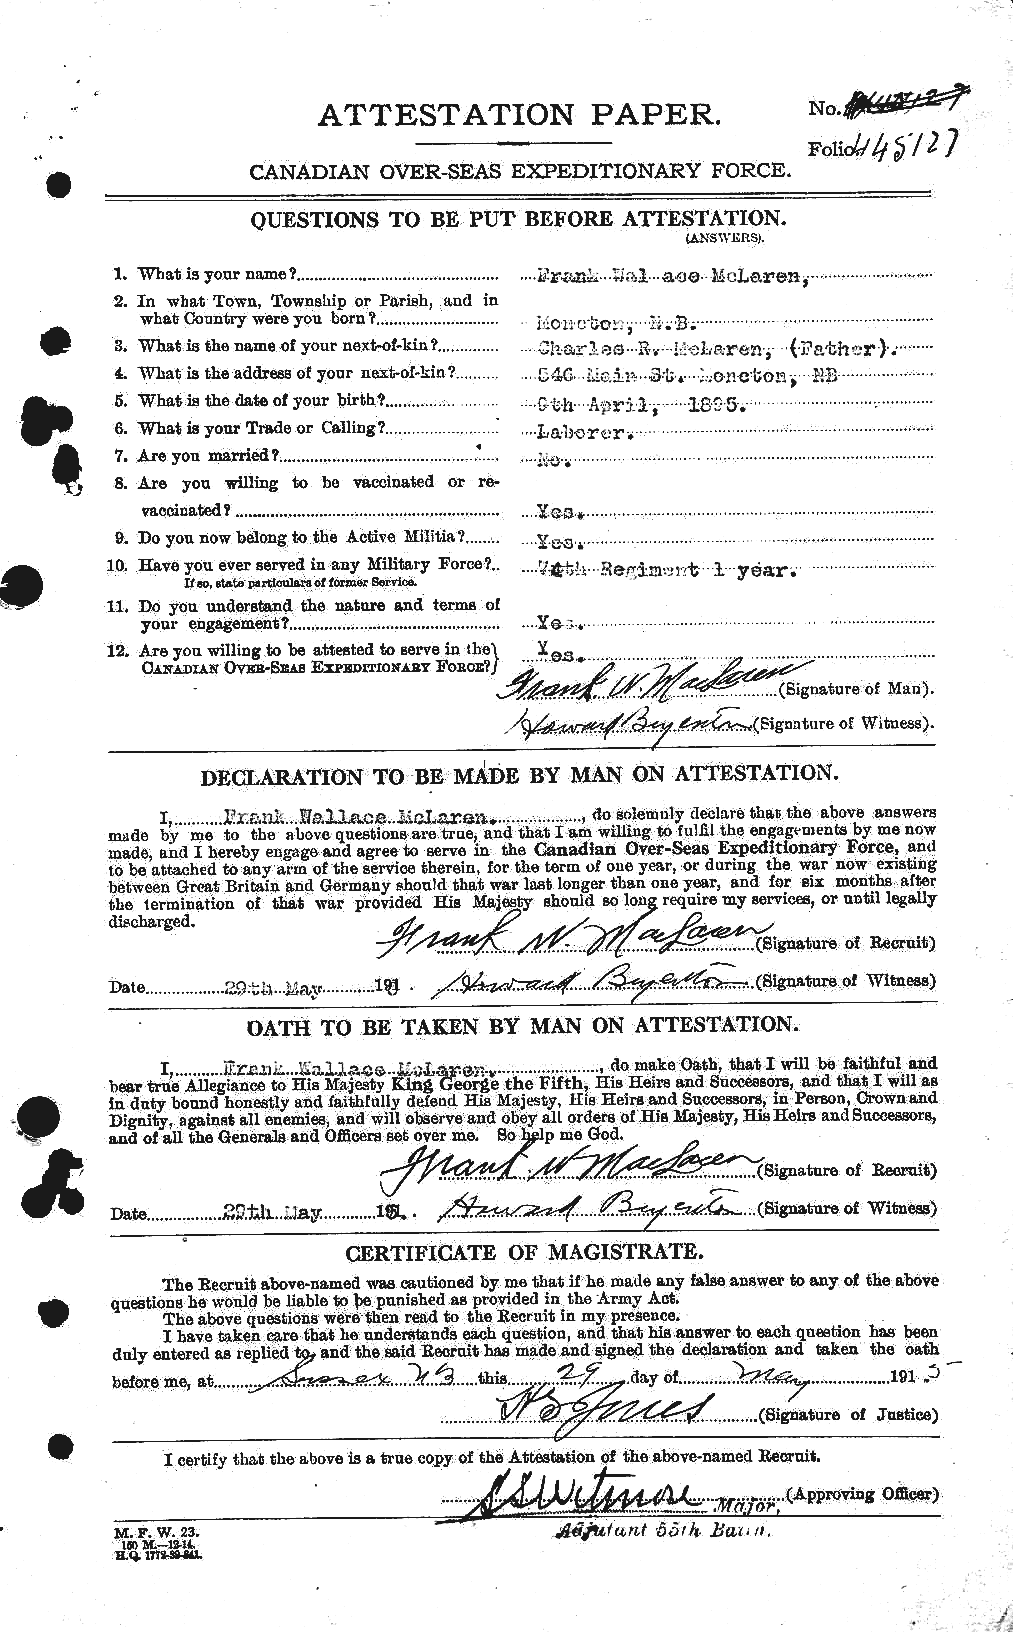 Personnel Records of the First World War - CEF 534112a